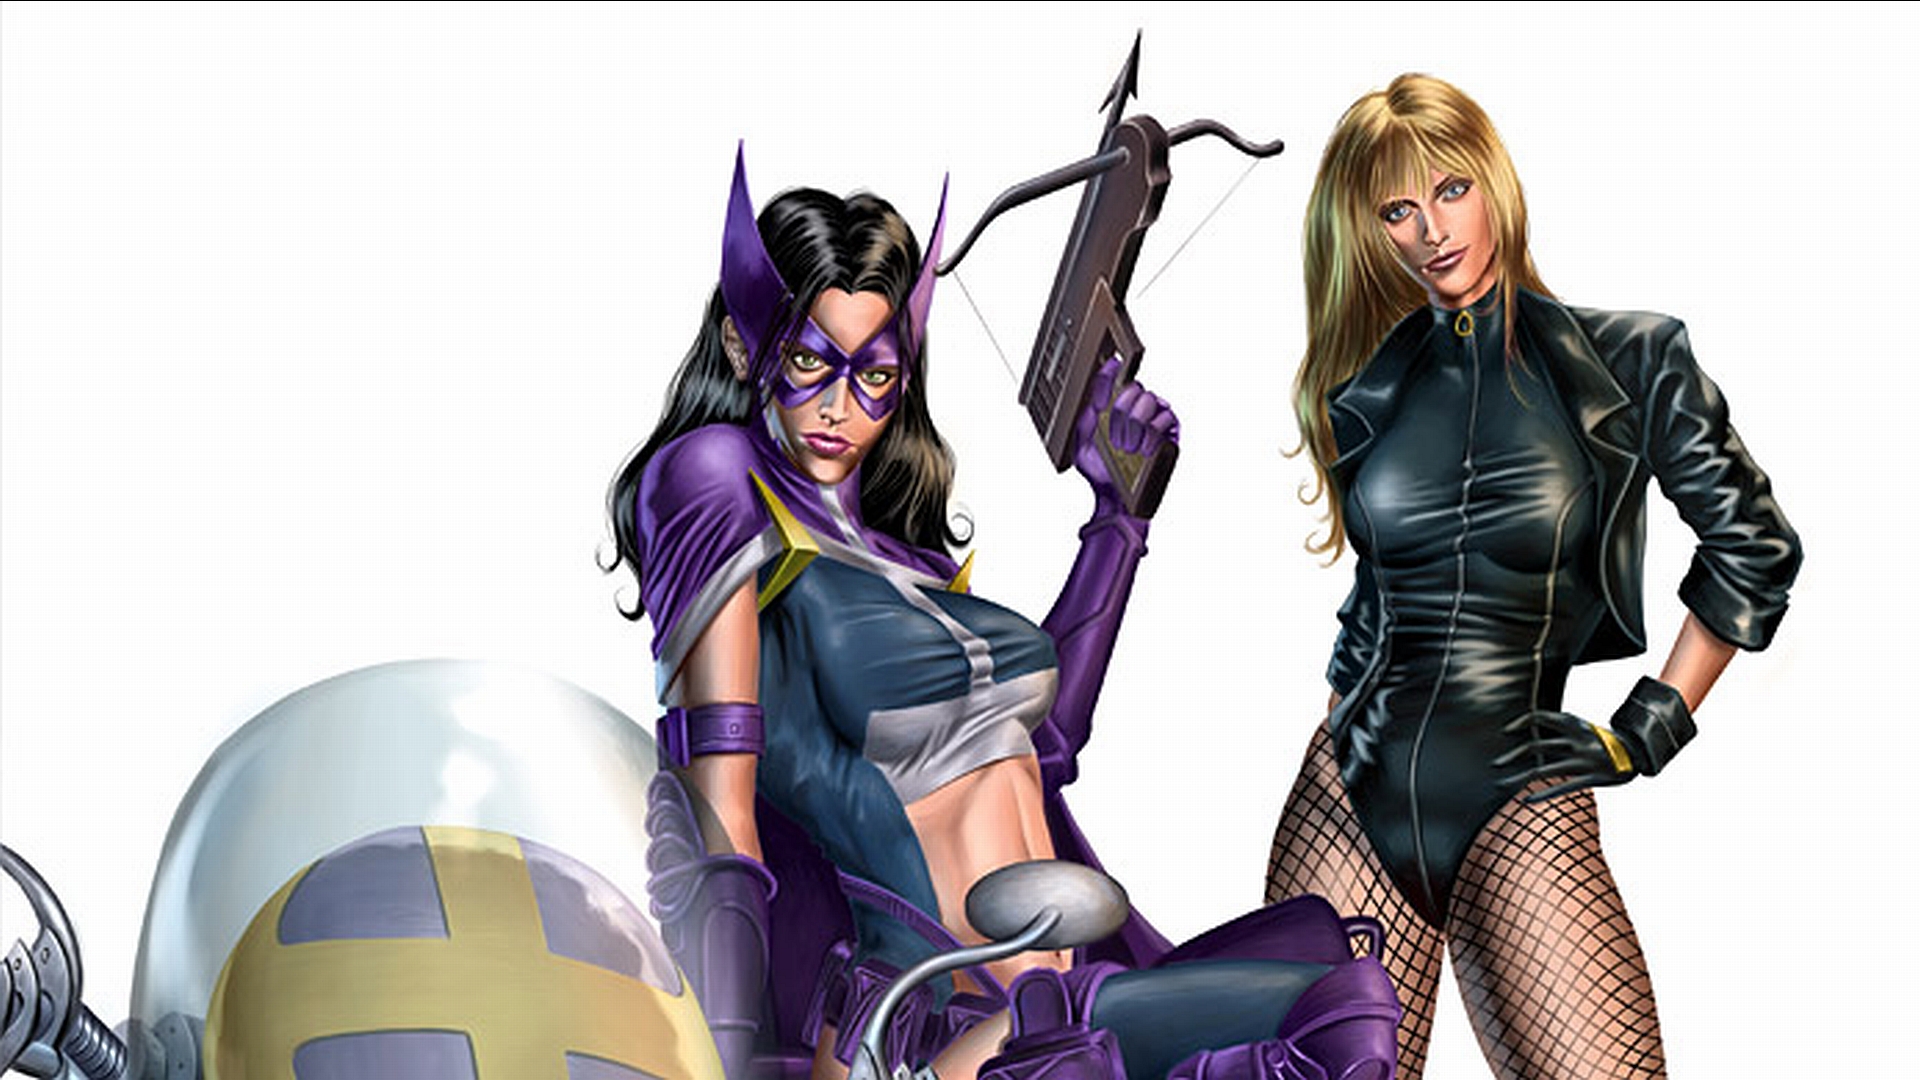 DC Comics' vigilante heroines, Black Canary and Huntress, prepare to take flight on their motorcycles, armed with a crossbow and a mask